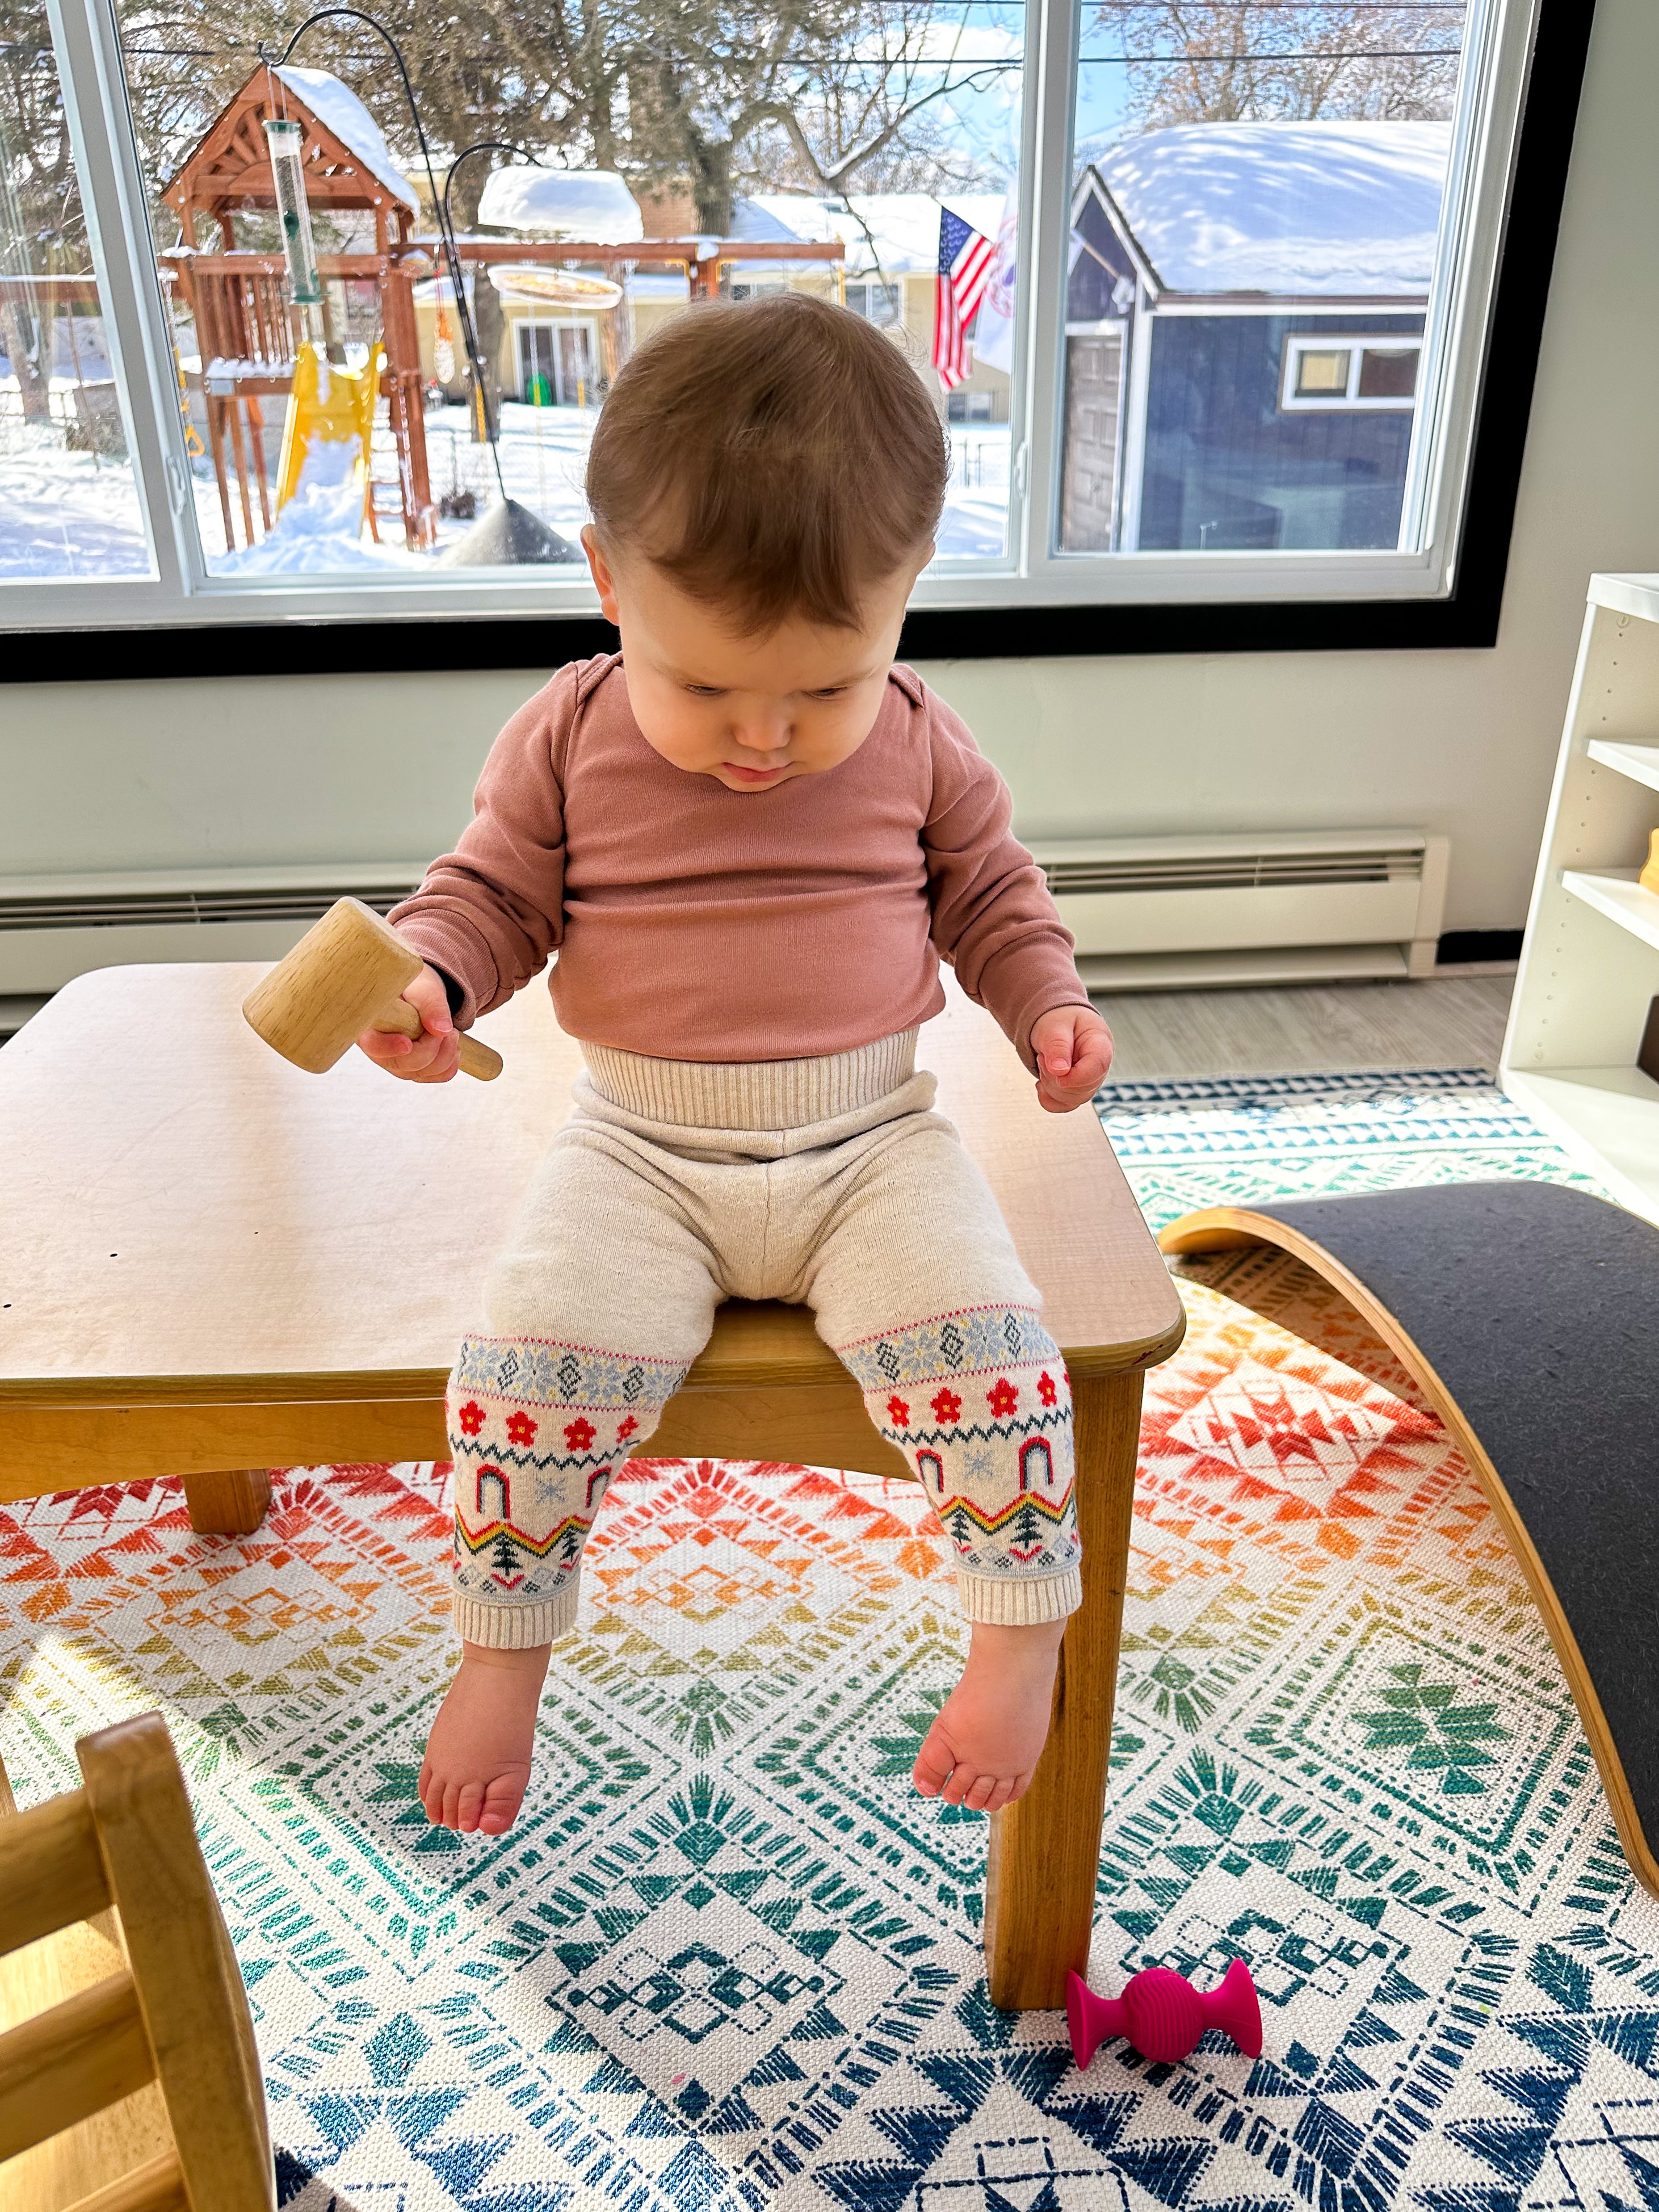 Montessori baby sits on top of table while holding a toy and looking toward her feet and the floor.